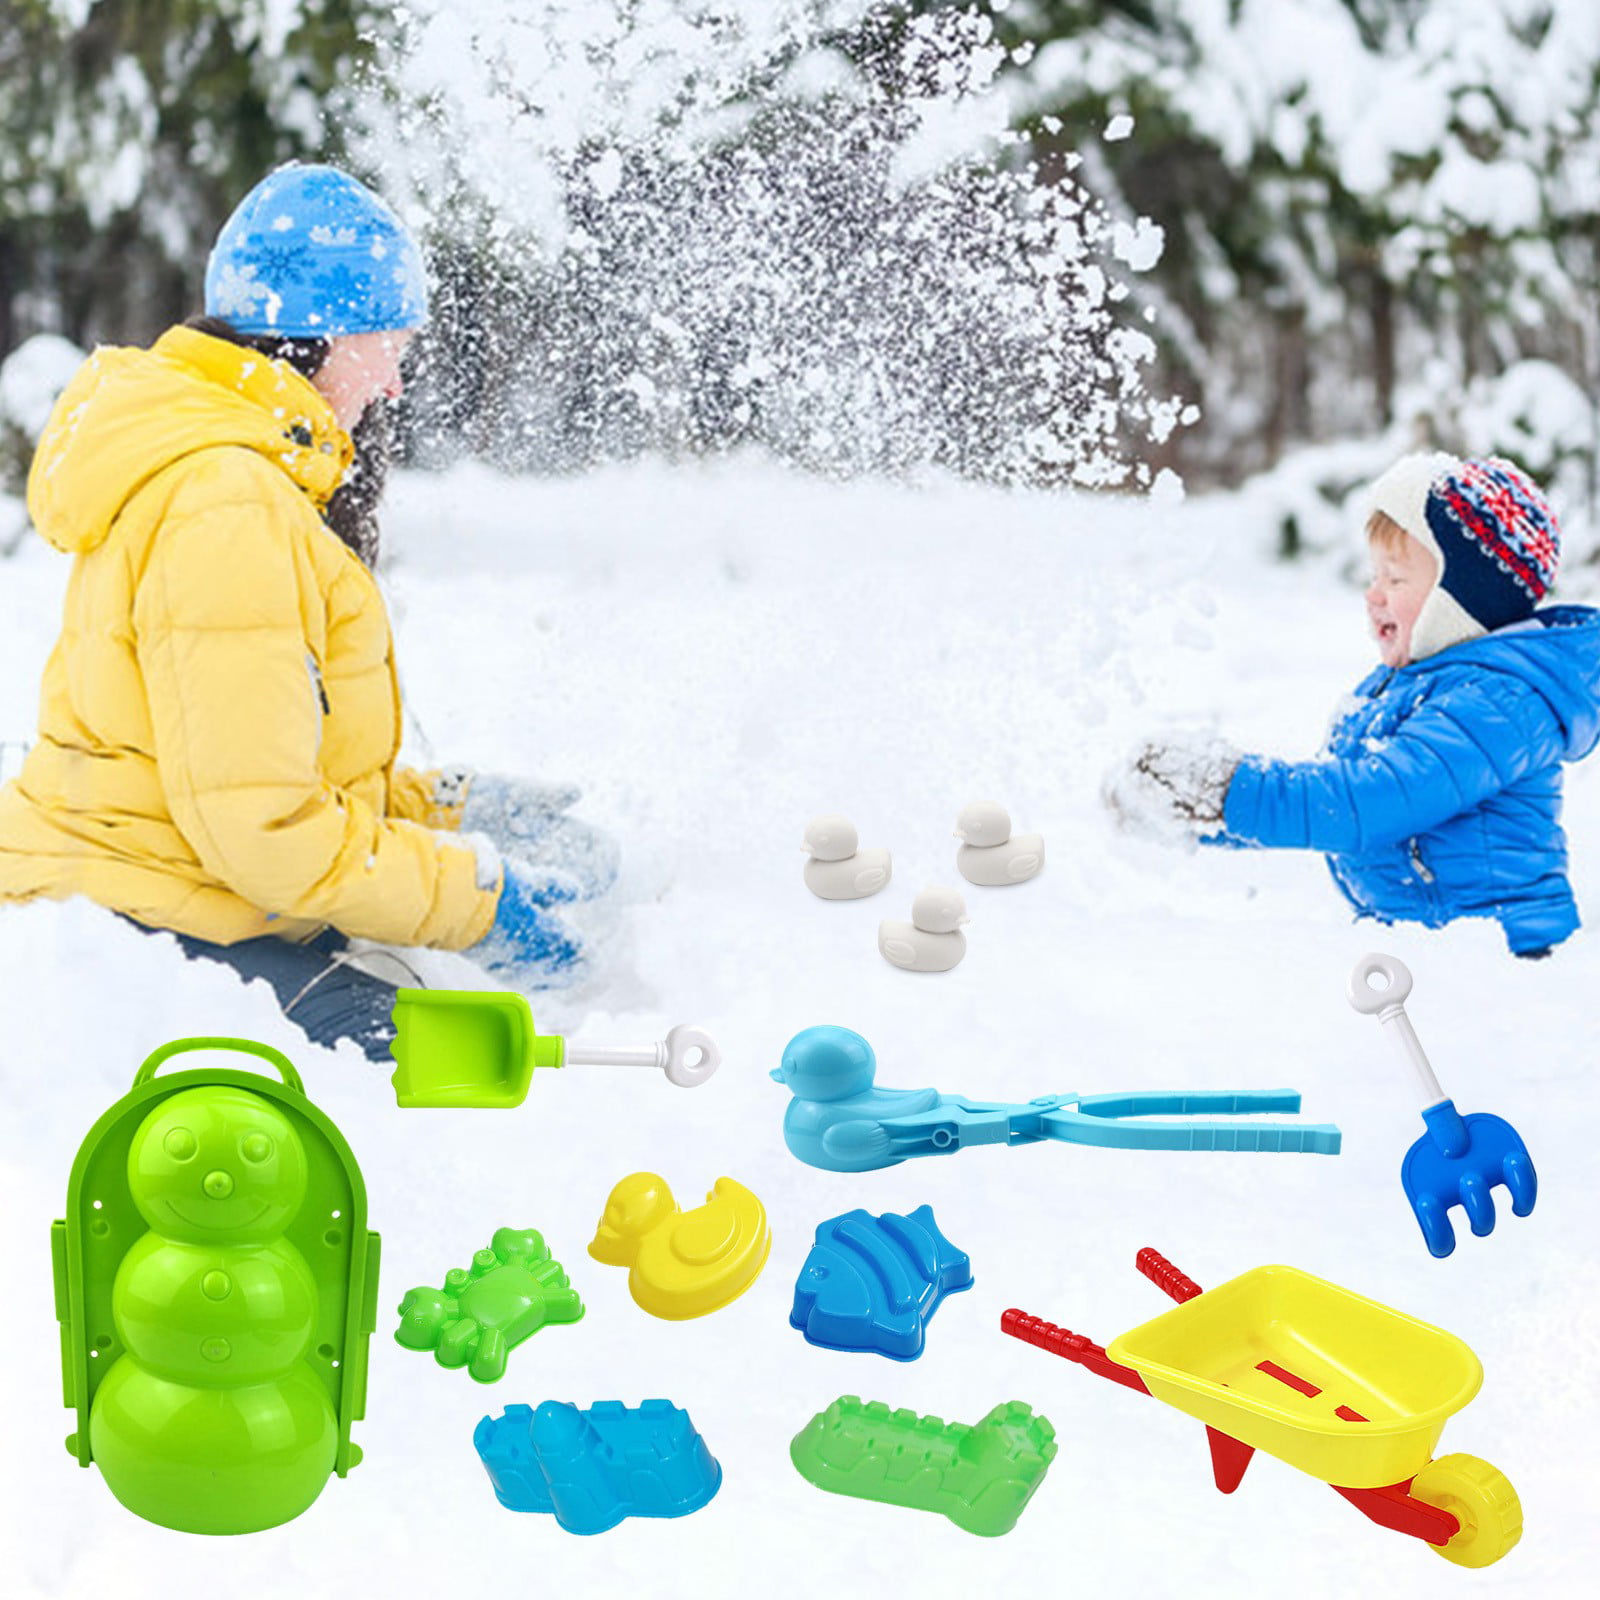 Winter Snow Ball Maker Tool Clip Kid Mold Sand Scoop Snowball Toy Sports HOT 